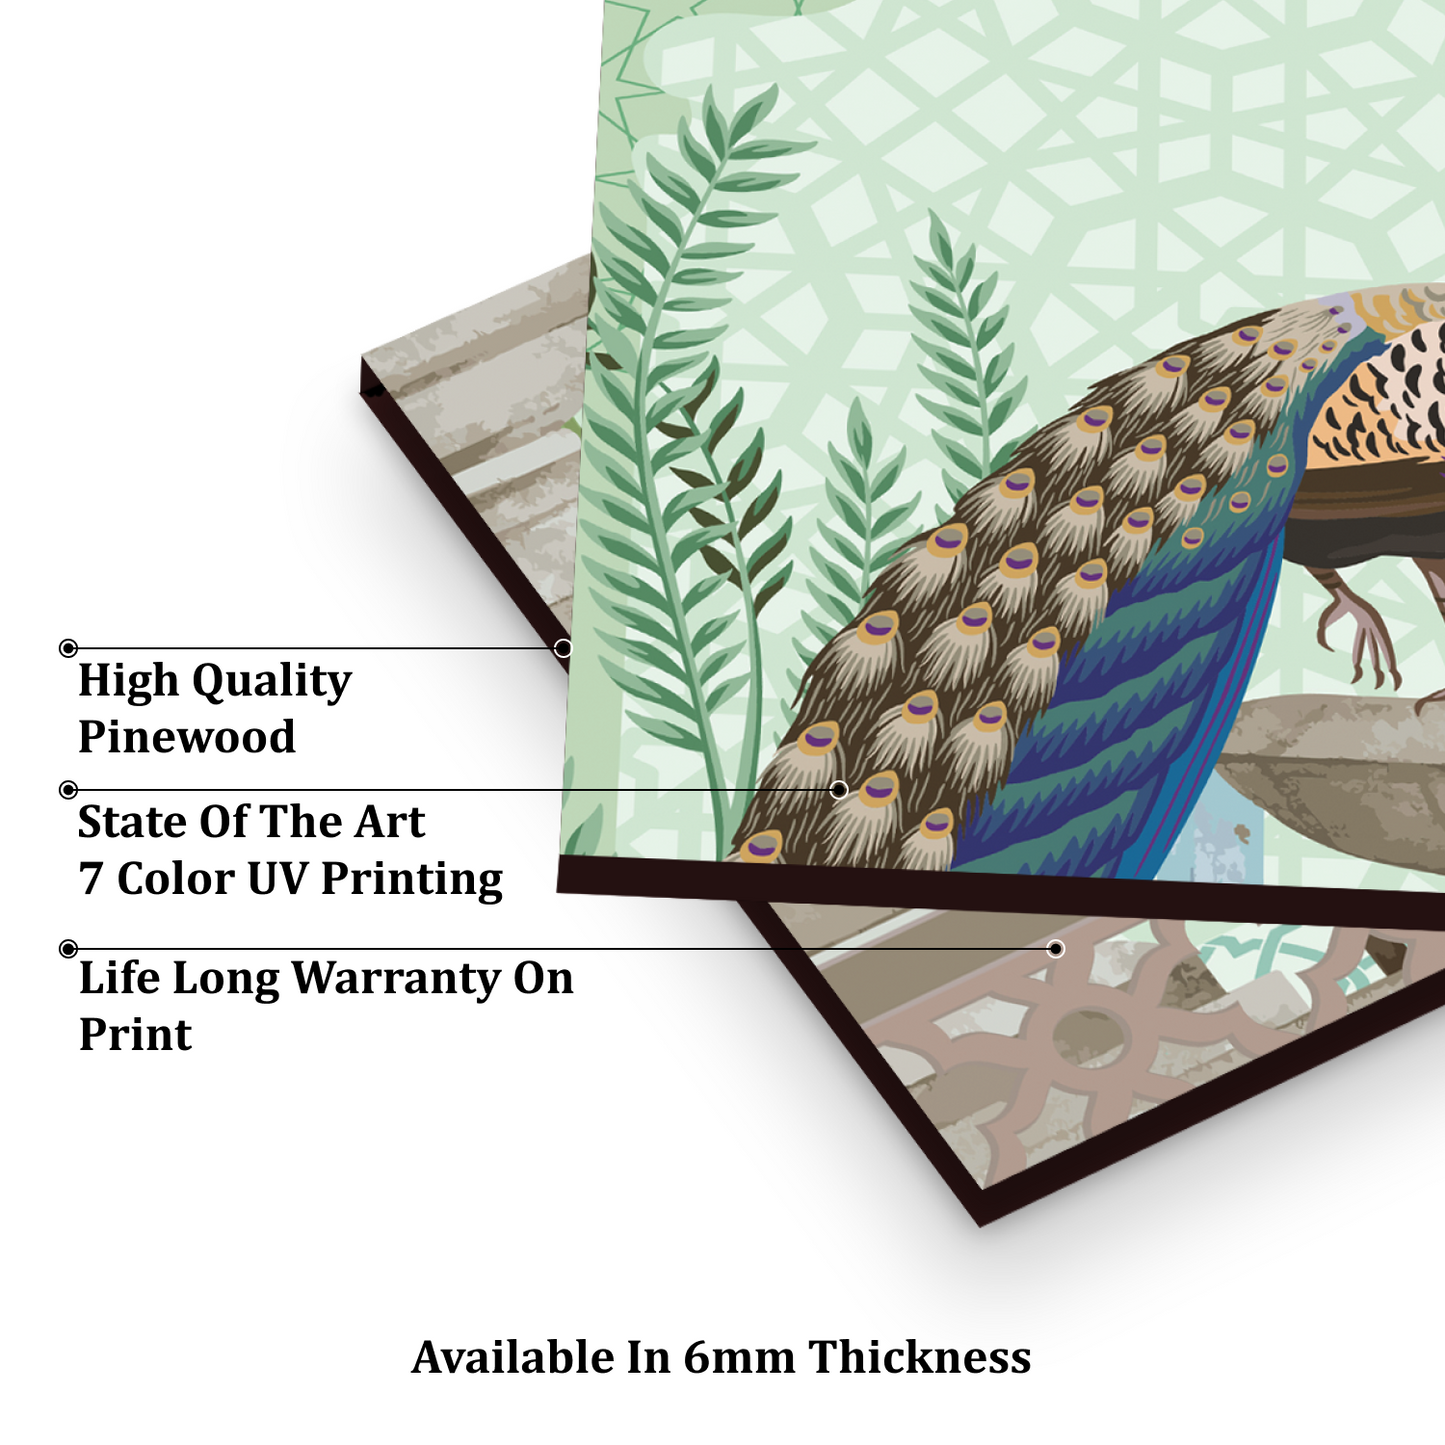 Peacock Sitting on Fountain Traditional Wood Print Wooden Wall Tiles Set